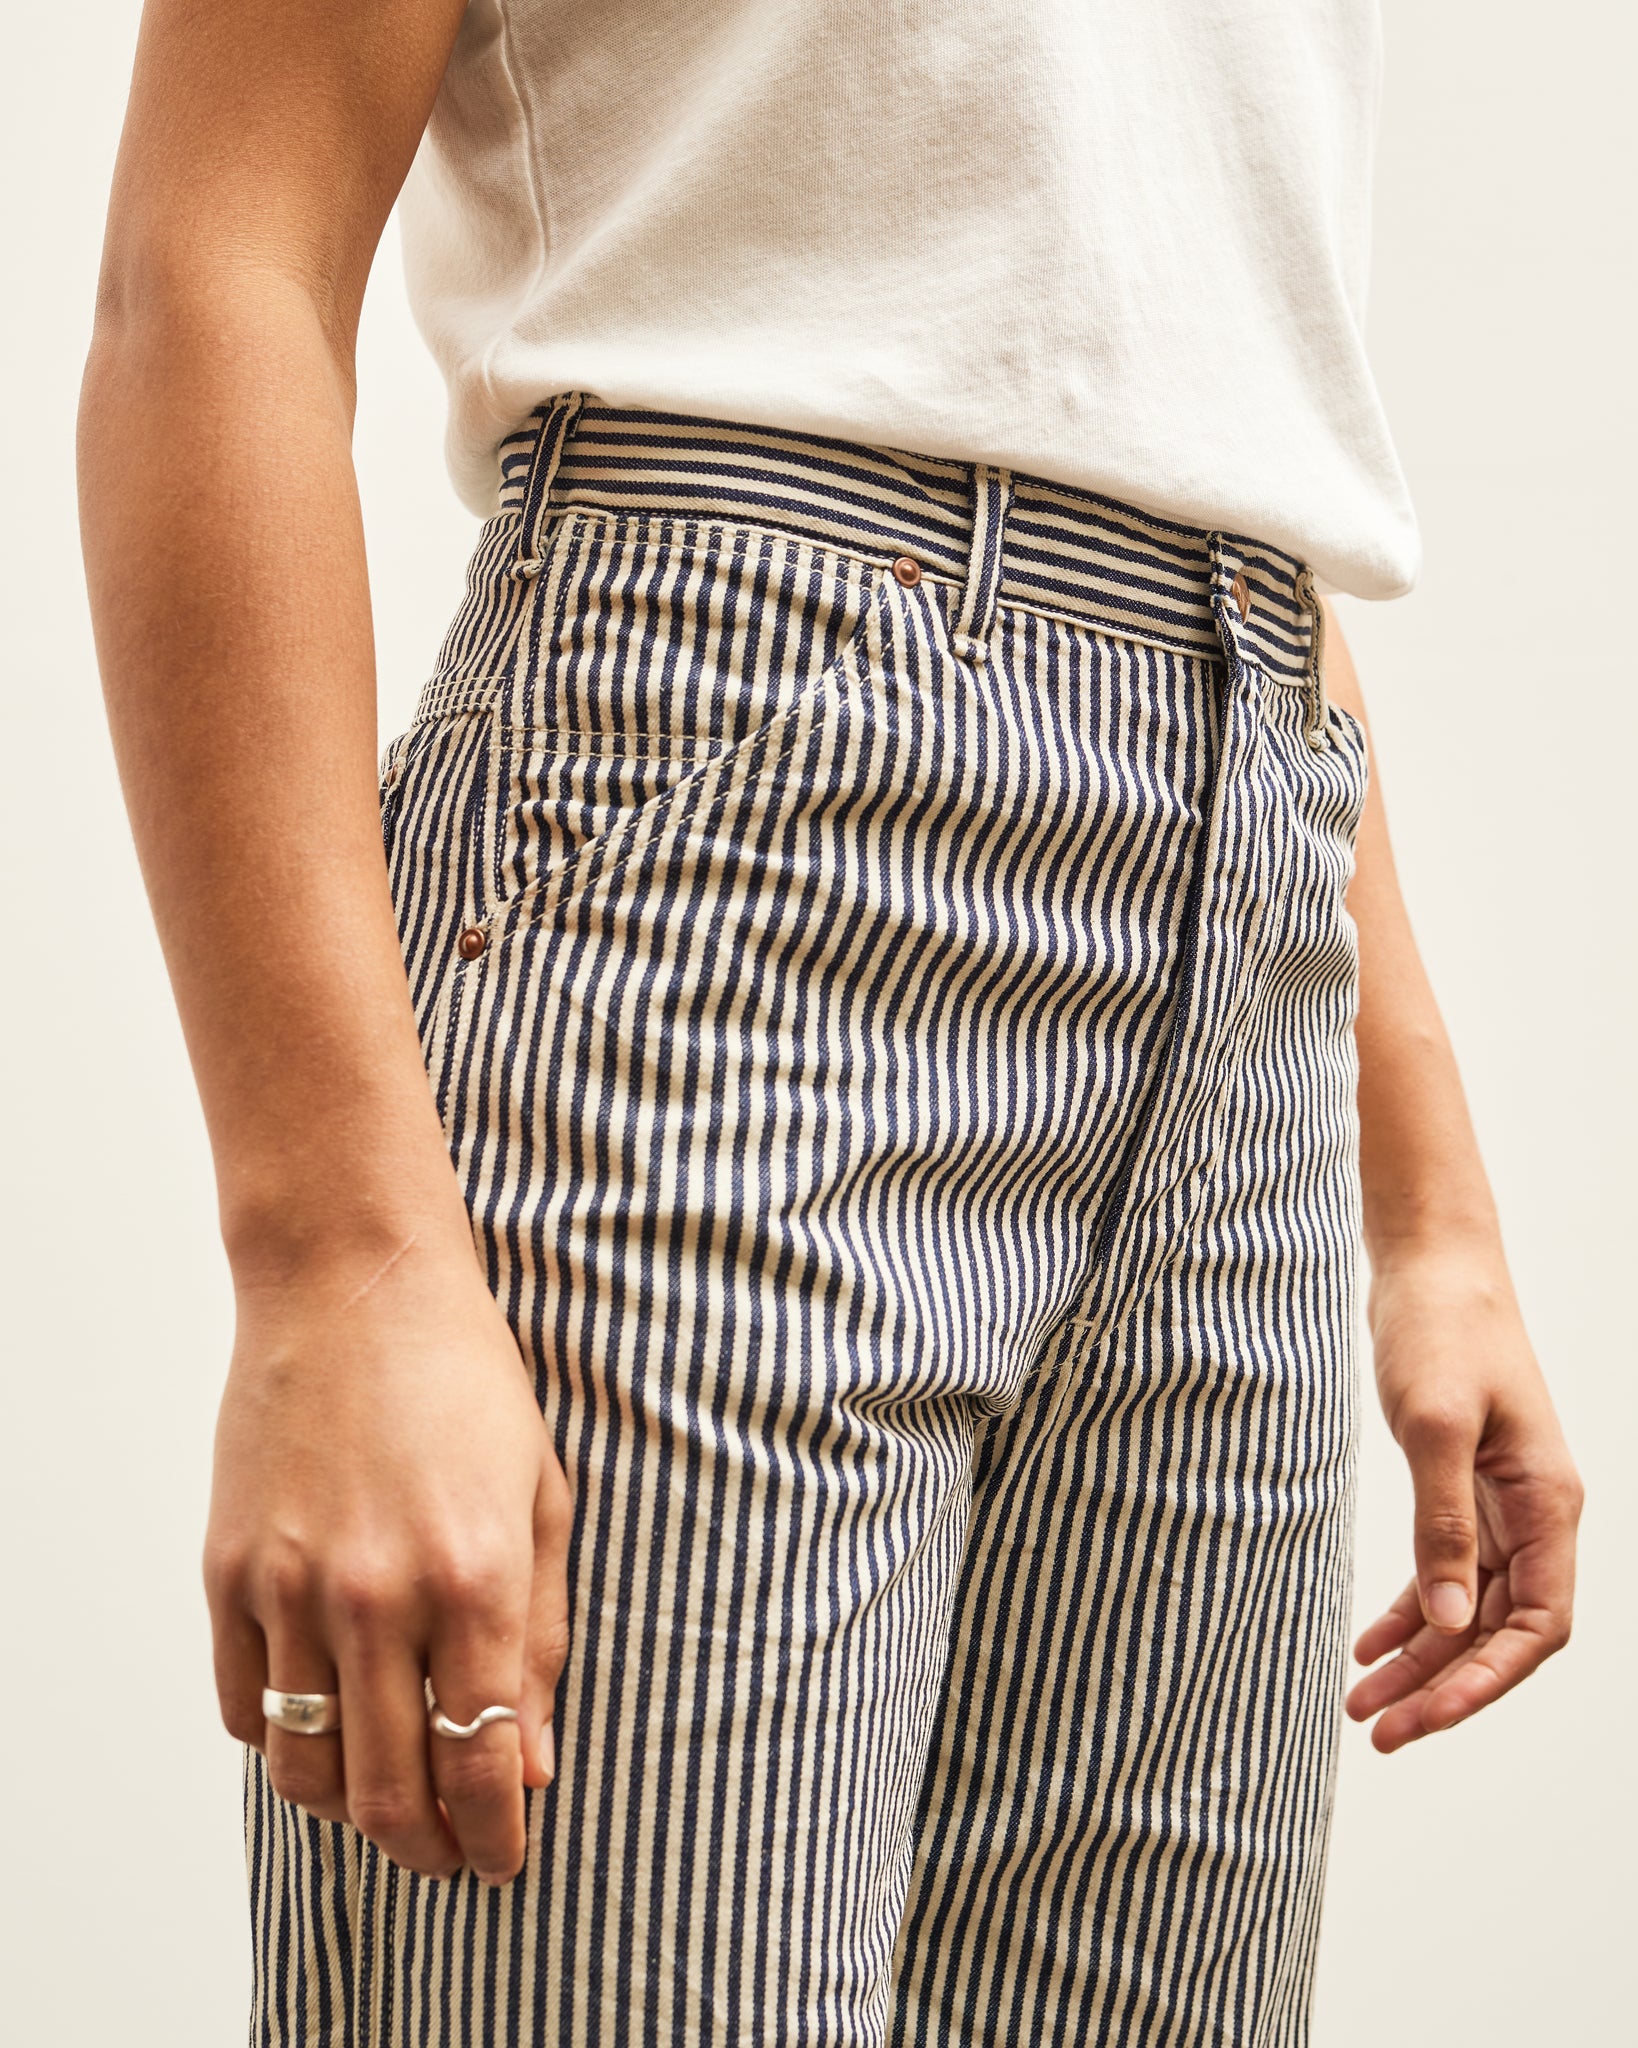 orSlow 1930's Painters Pants, Hickory Stripe